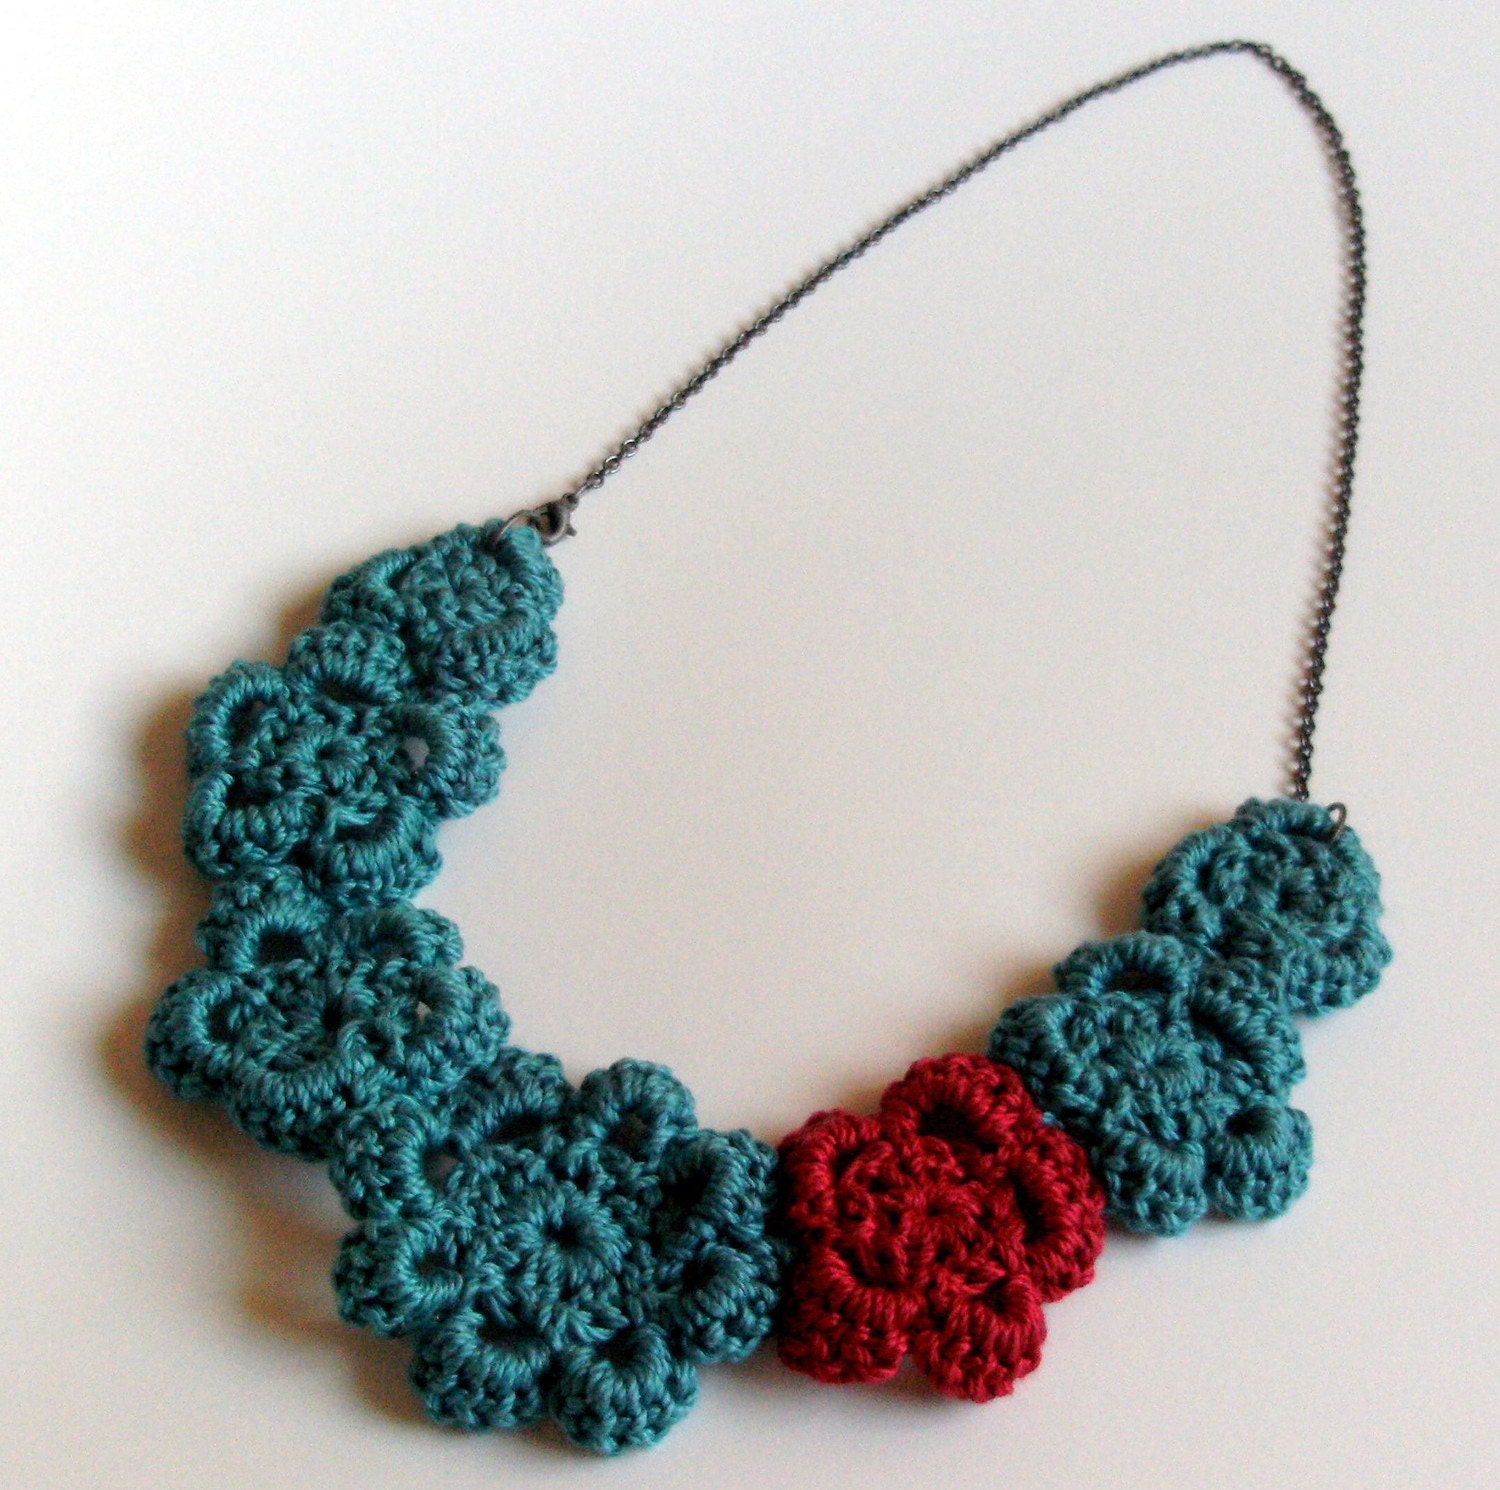 Crocheted Flower Necklace - Turquoise and Red